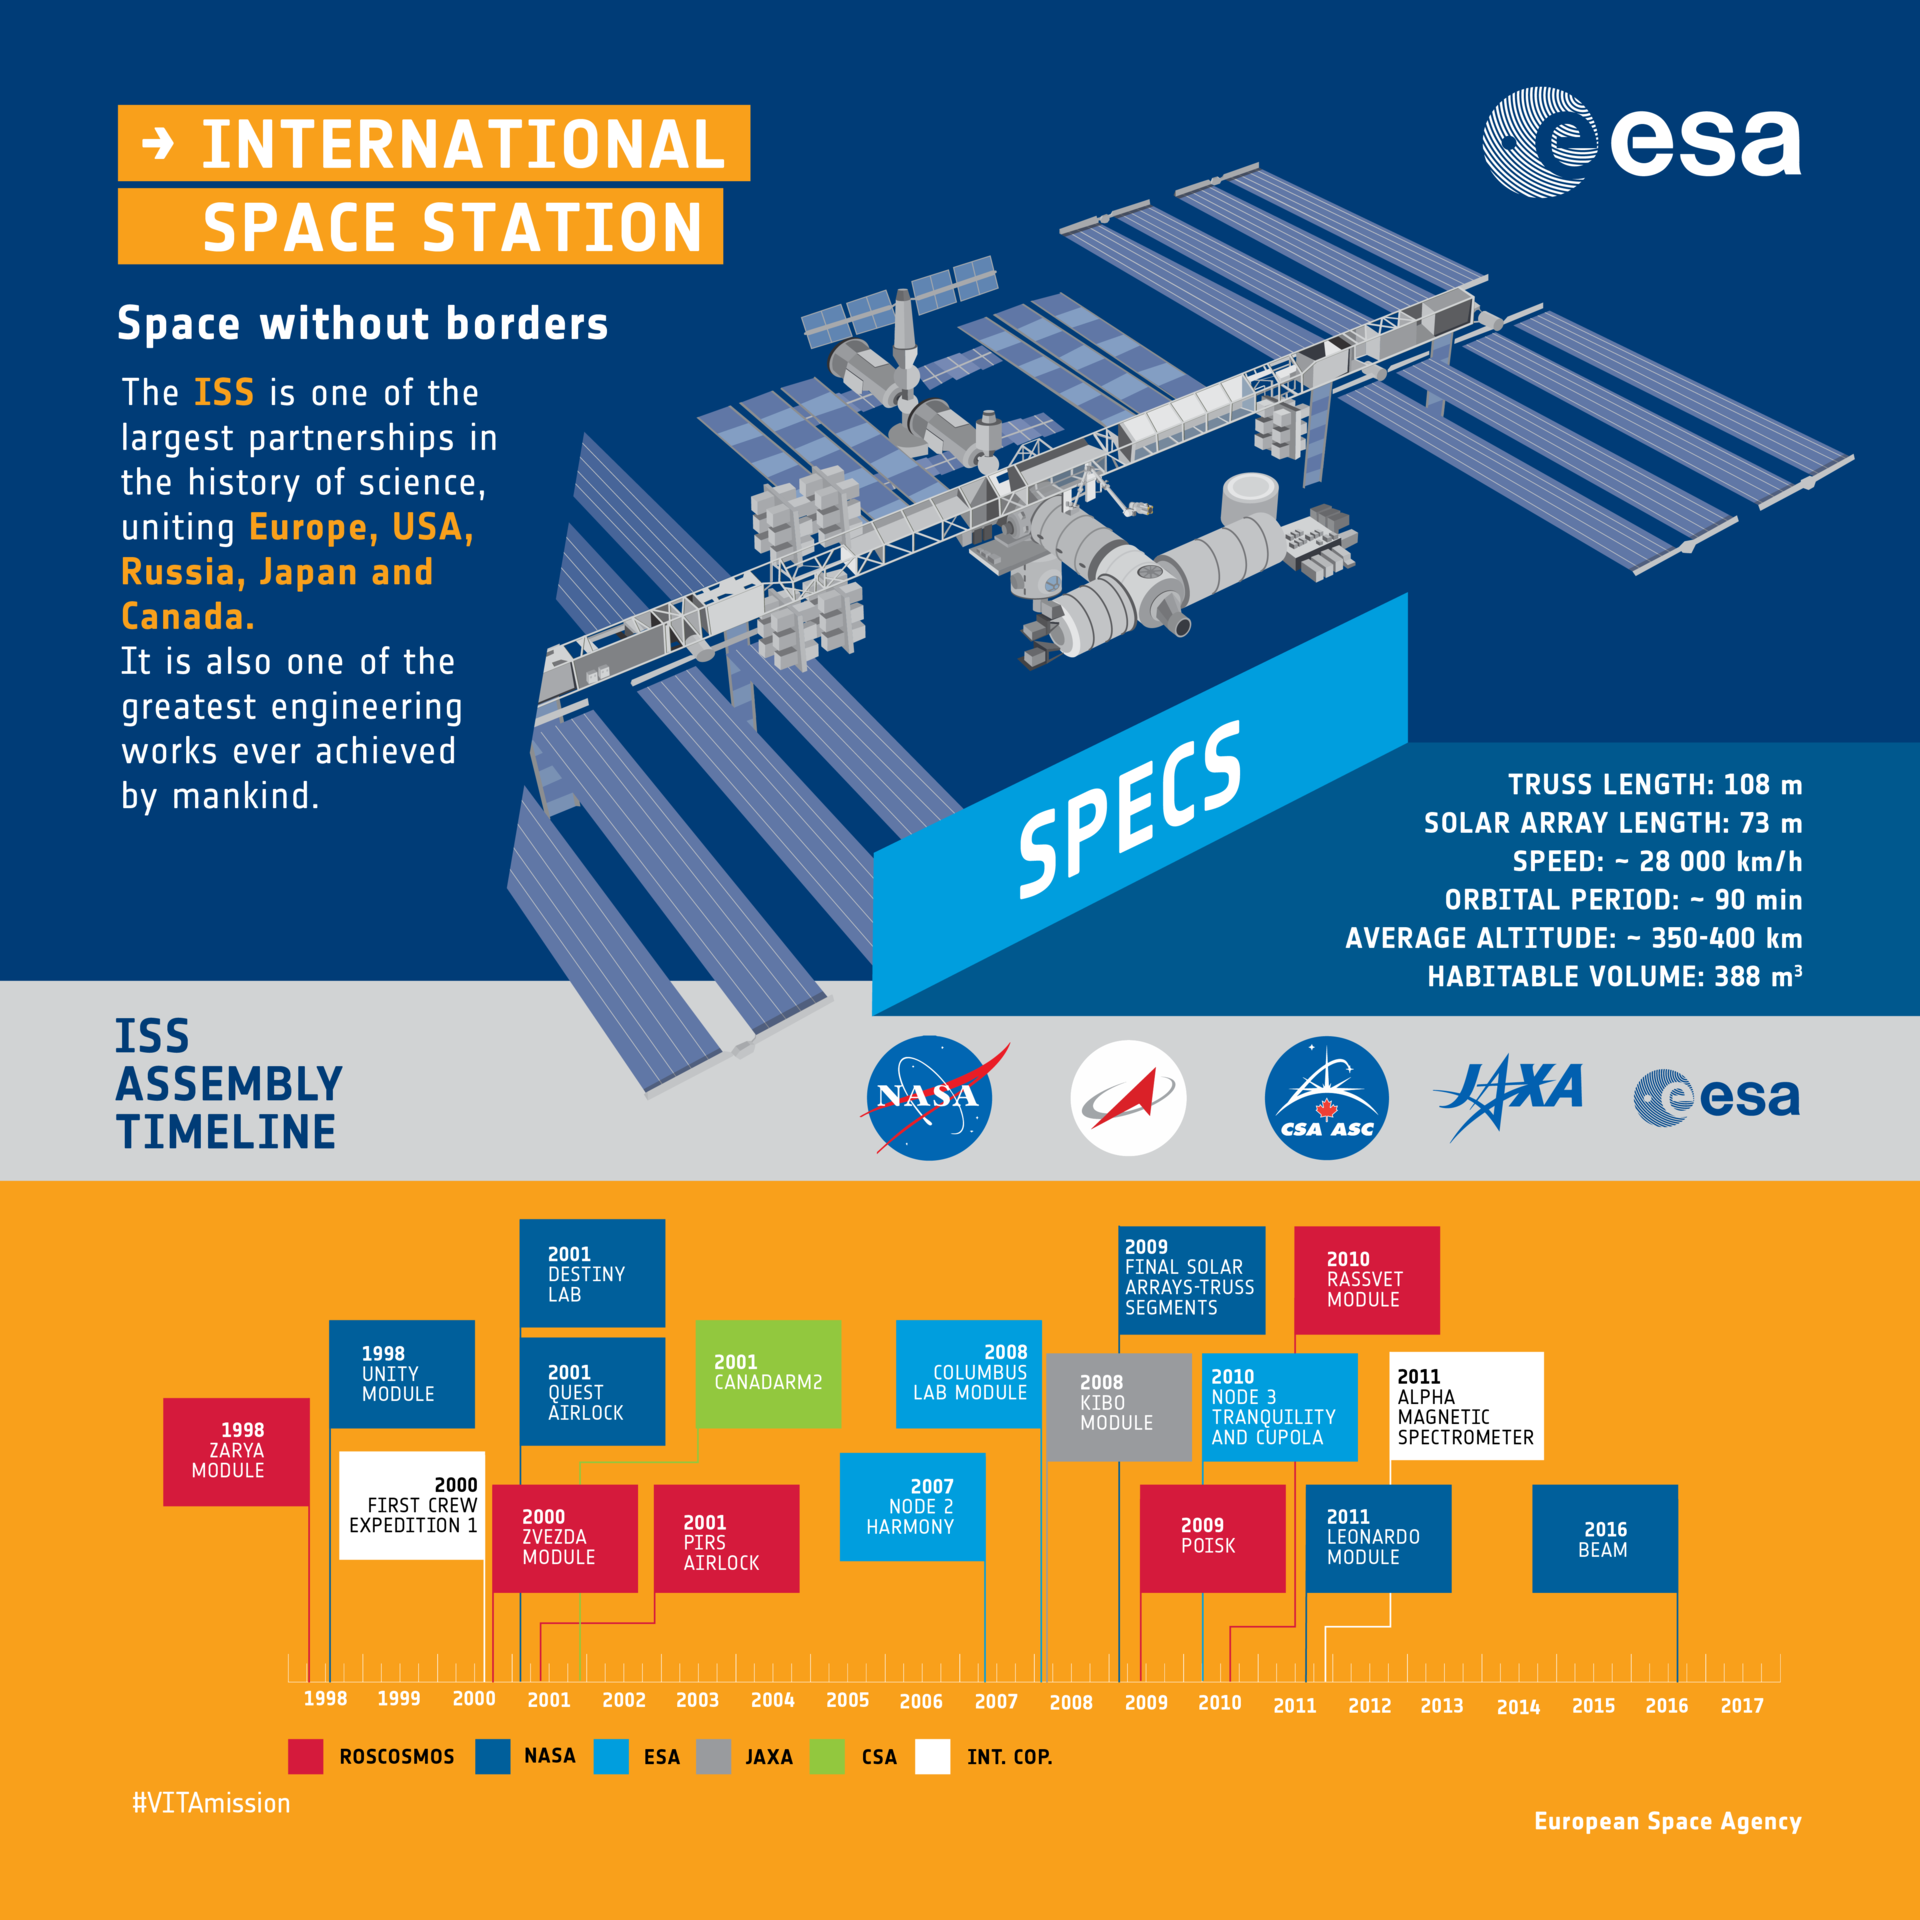 ESA - International Space Station: an infographic